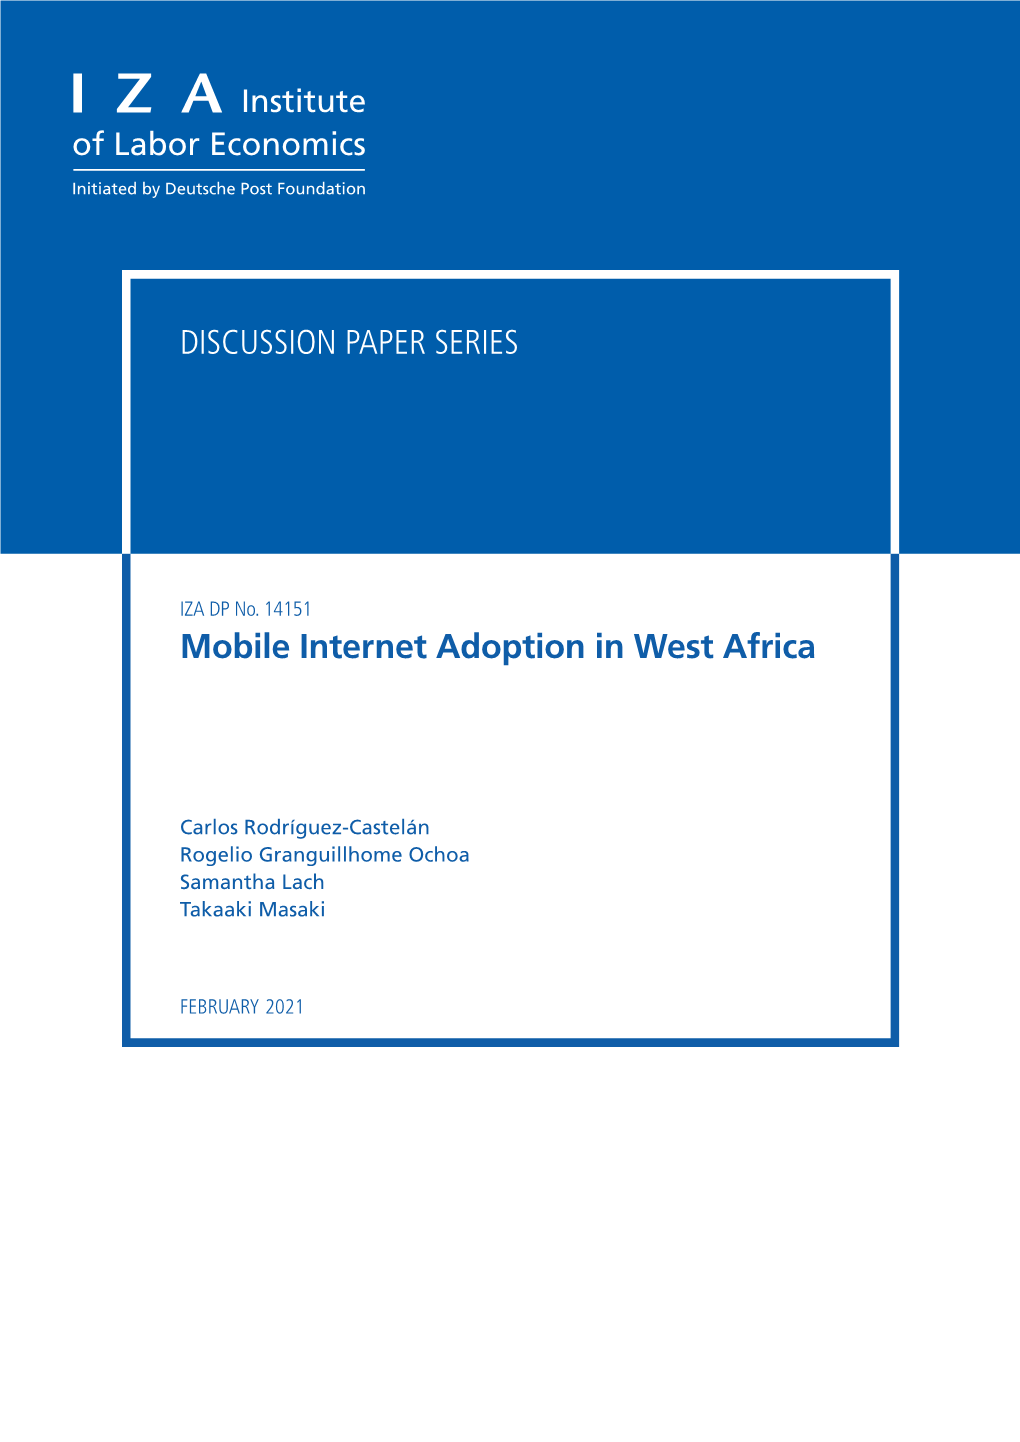 Mobile Internet Adoption in West Africa